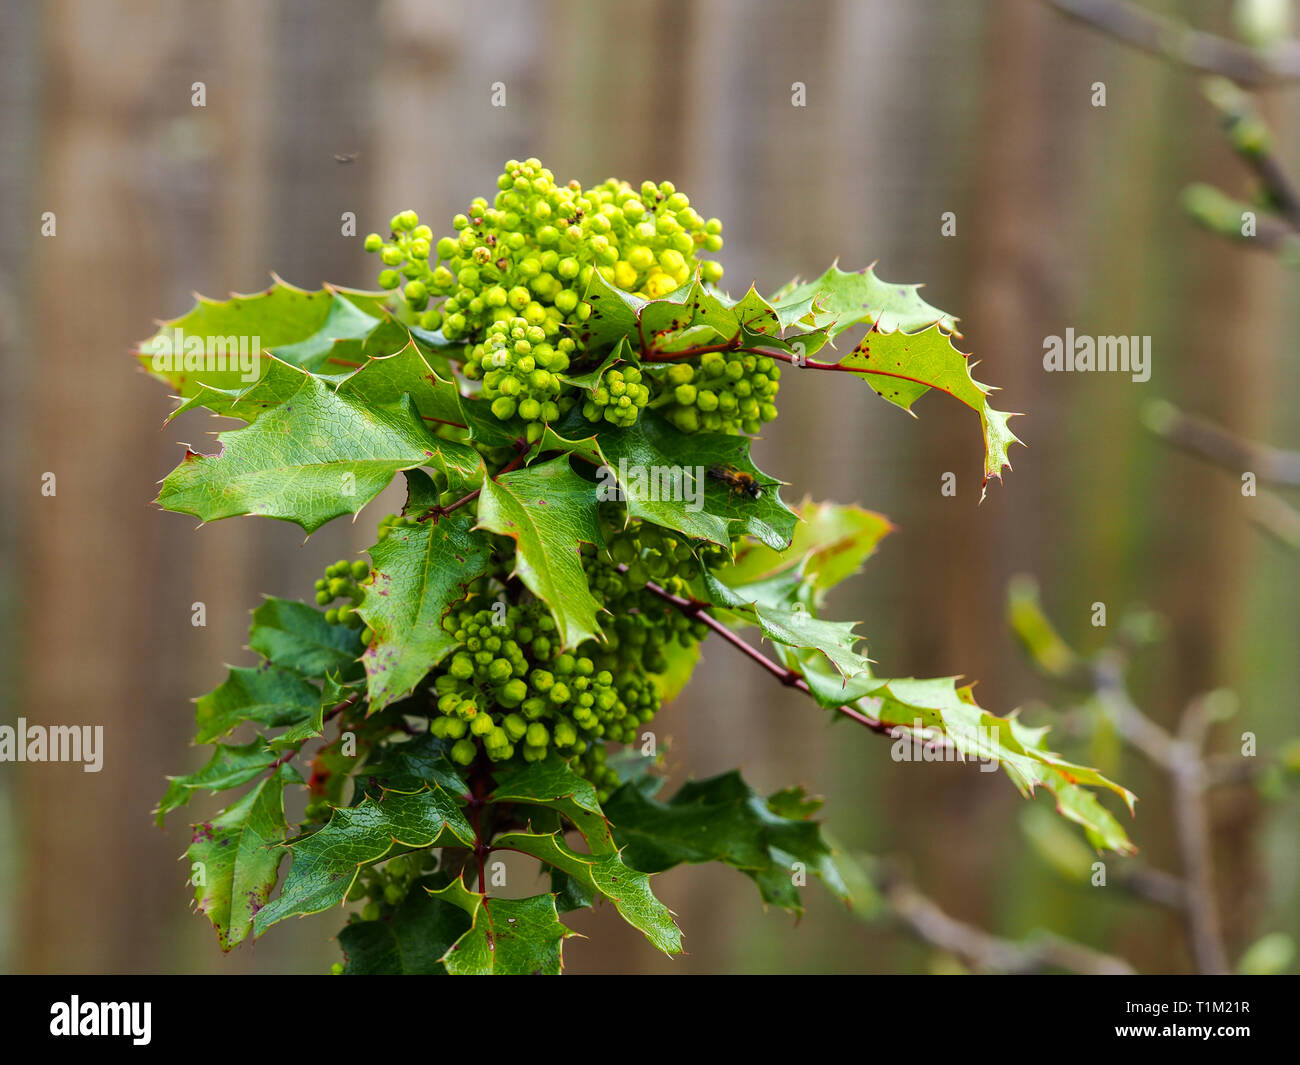 Green shiny leaves and yellow flower buds on a holly bush in spring Stock Photo